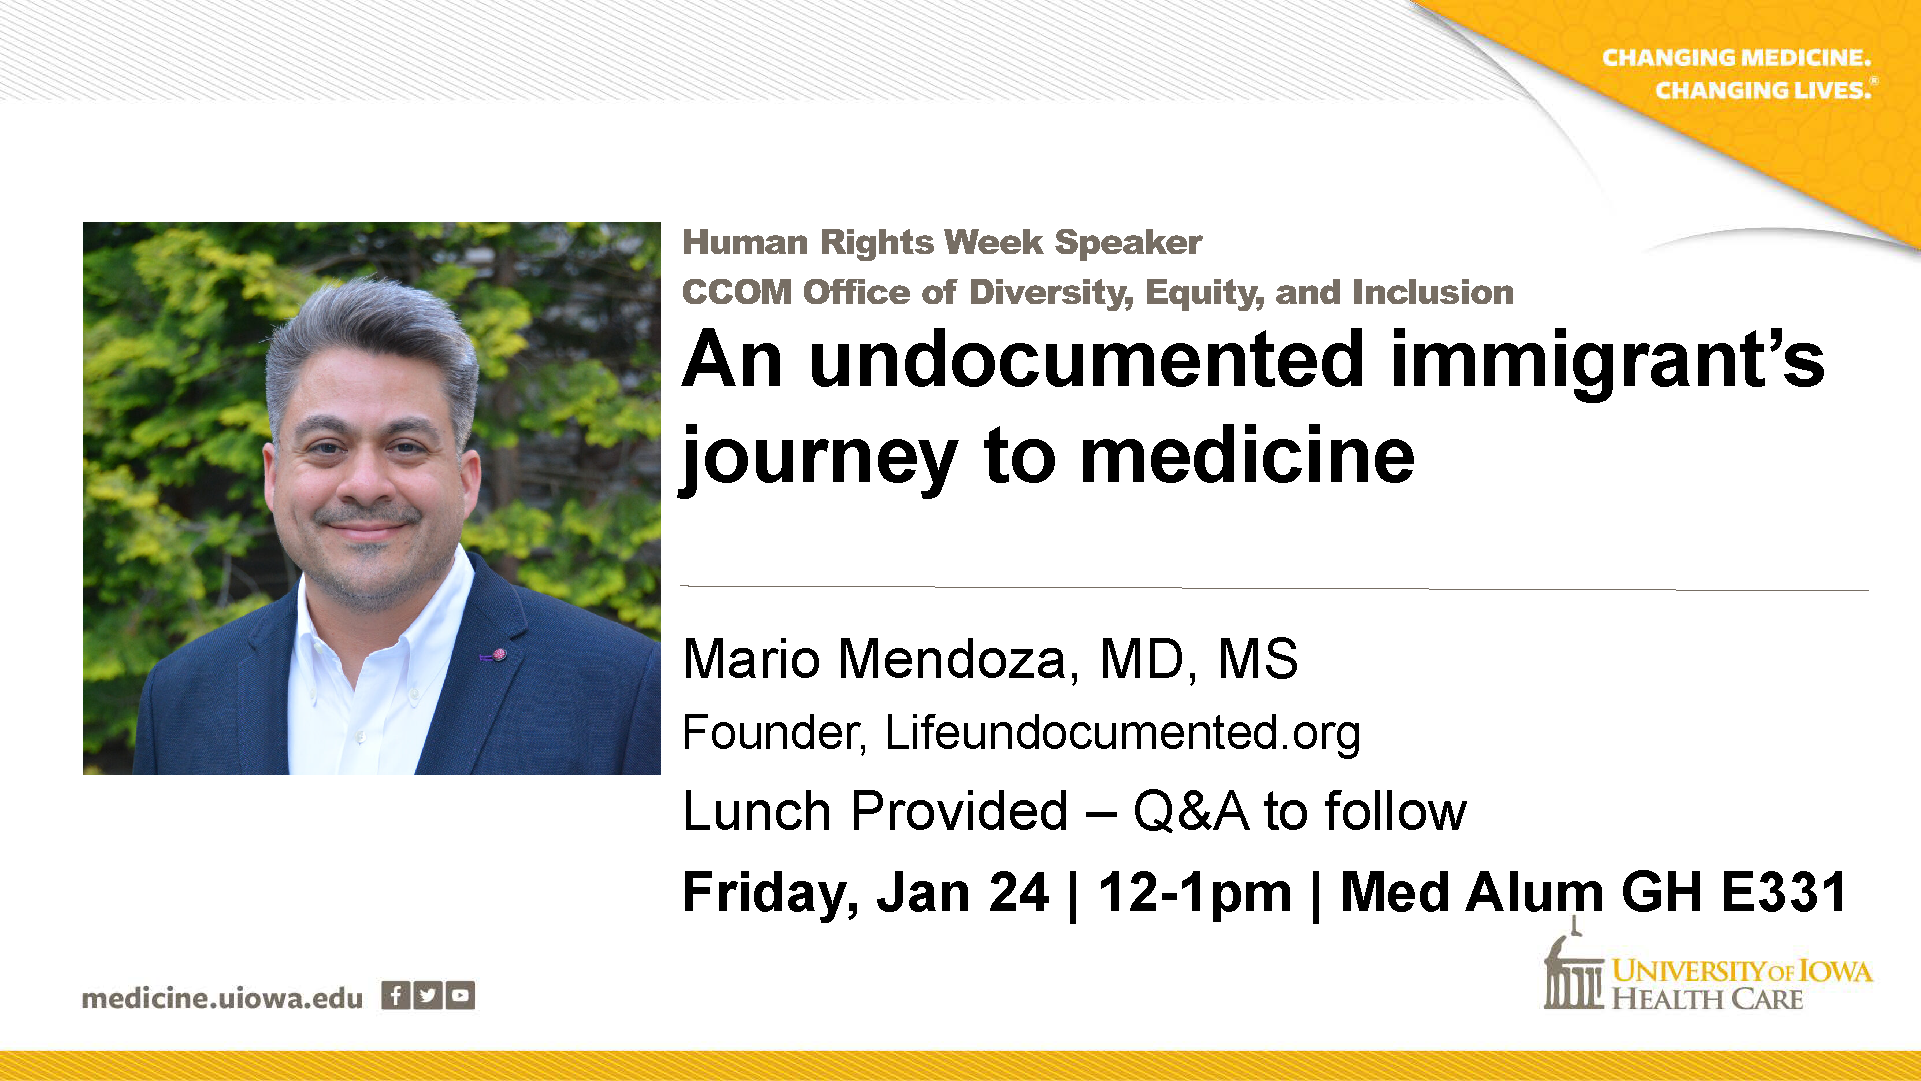 Human Rights Week Speaker: Mario Mendoza, MD, MS. An undocumented immigrant's journey to medicine. Friday, January 24, 2020 from 12pm to 1pm, in Med Alum GH E331